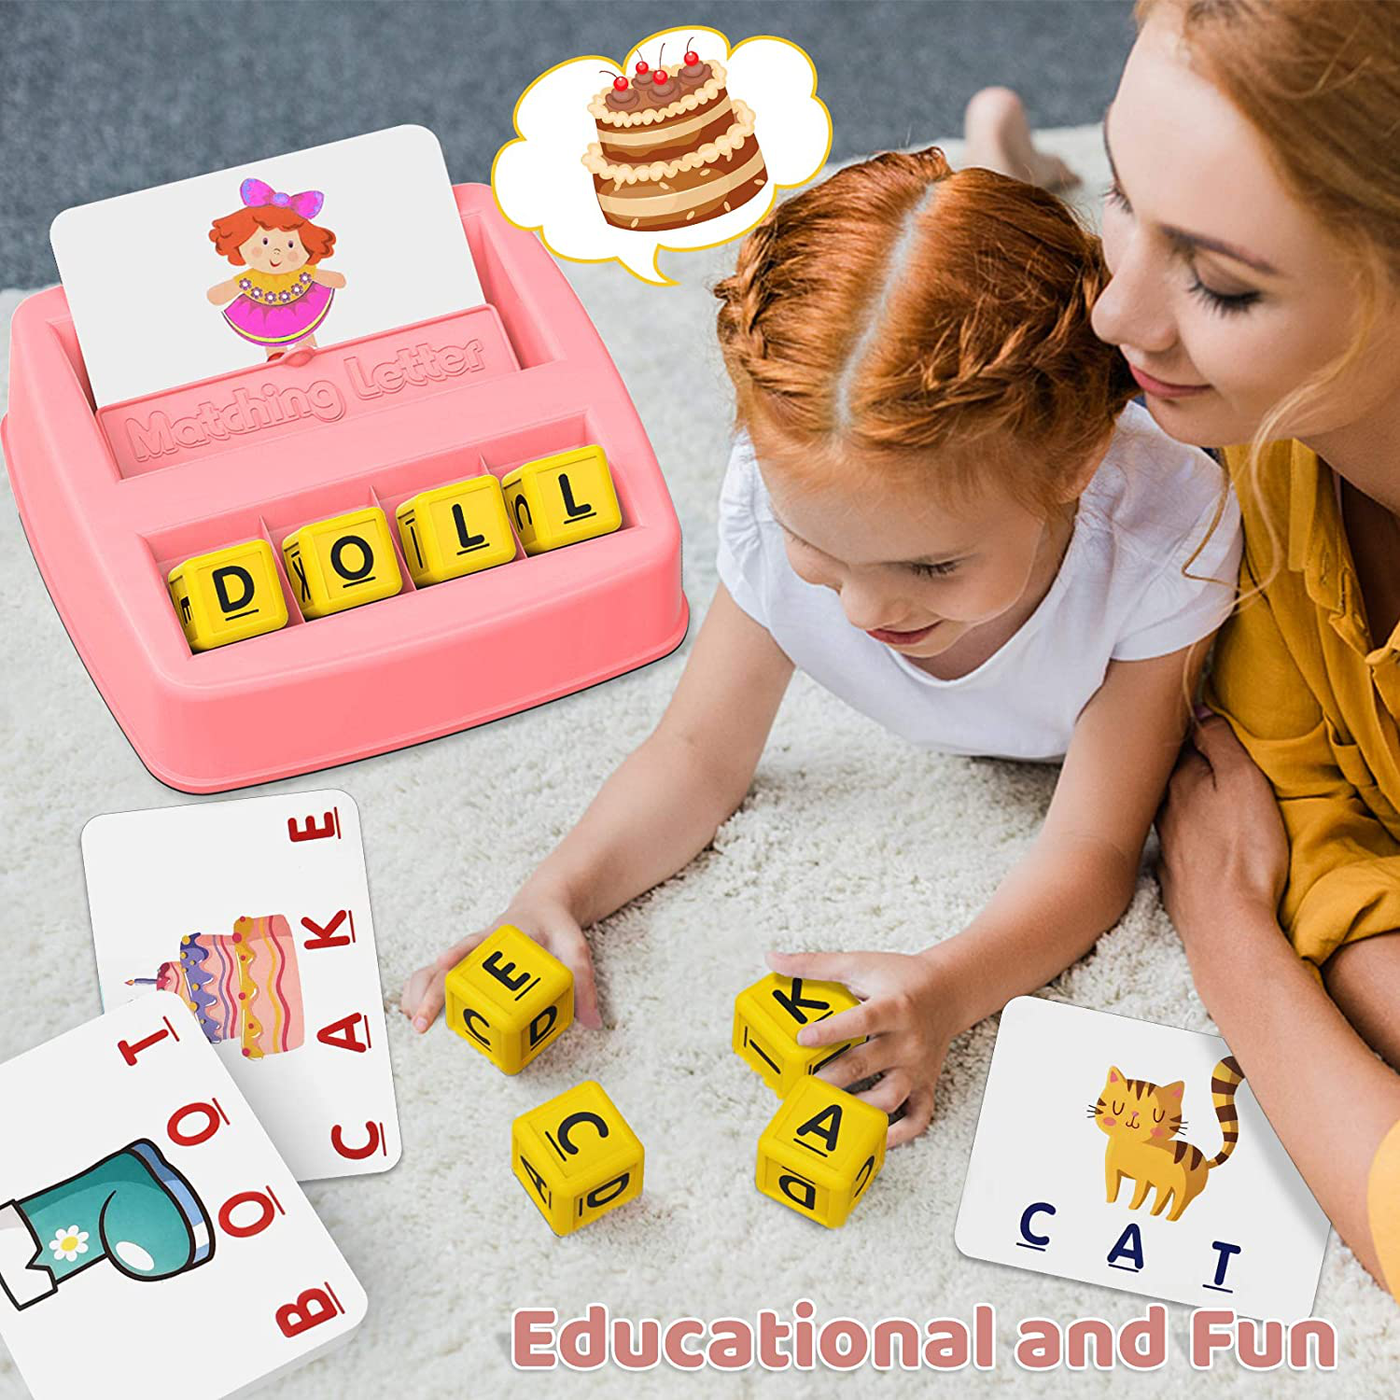 HahaGift Educational Toys for 3-5 Year Old Boy Girl Gifts, Matching Letter Learning Games Activities, Ideal Christmas Birthday Gift for Toddler Kids Age 2 3 4 5 Year Olds Boys Girls